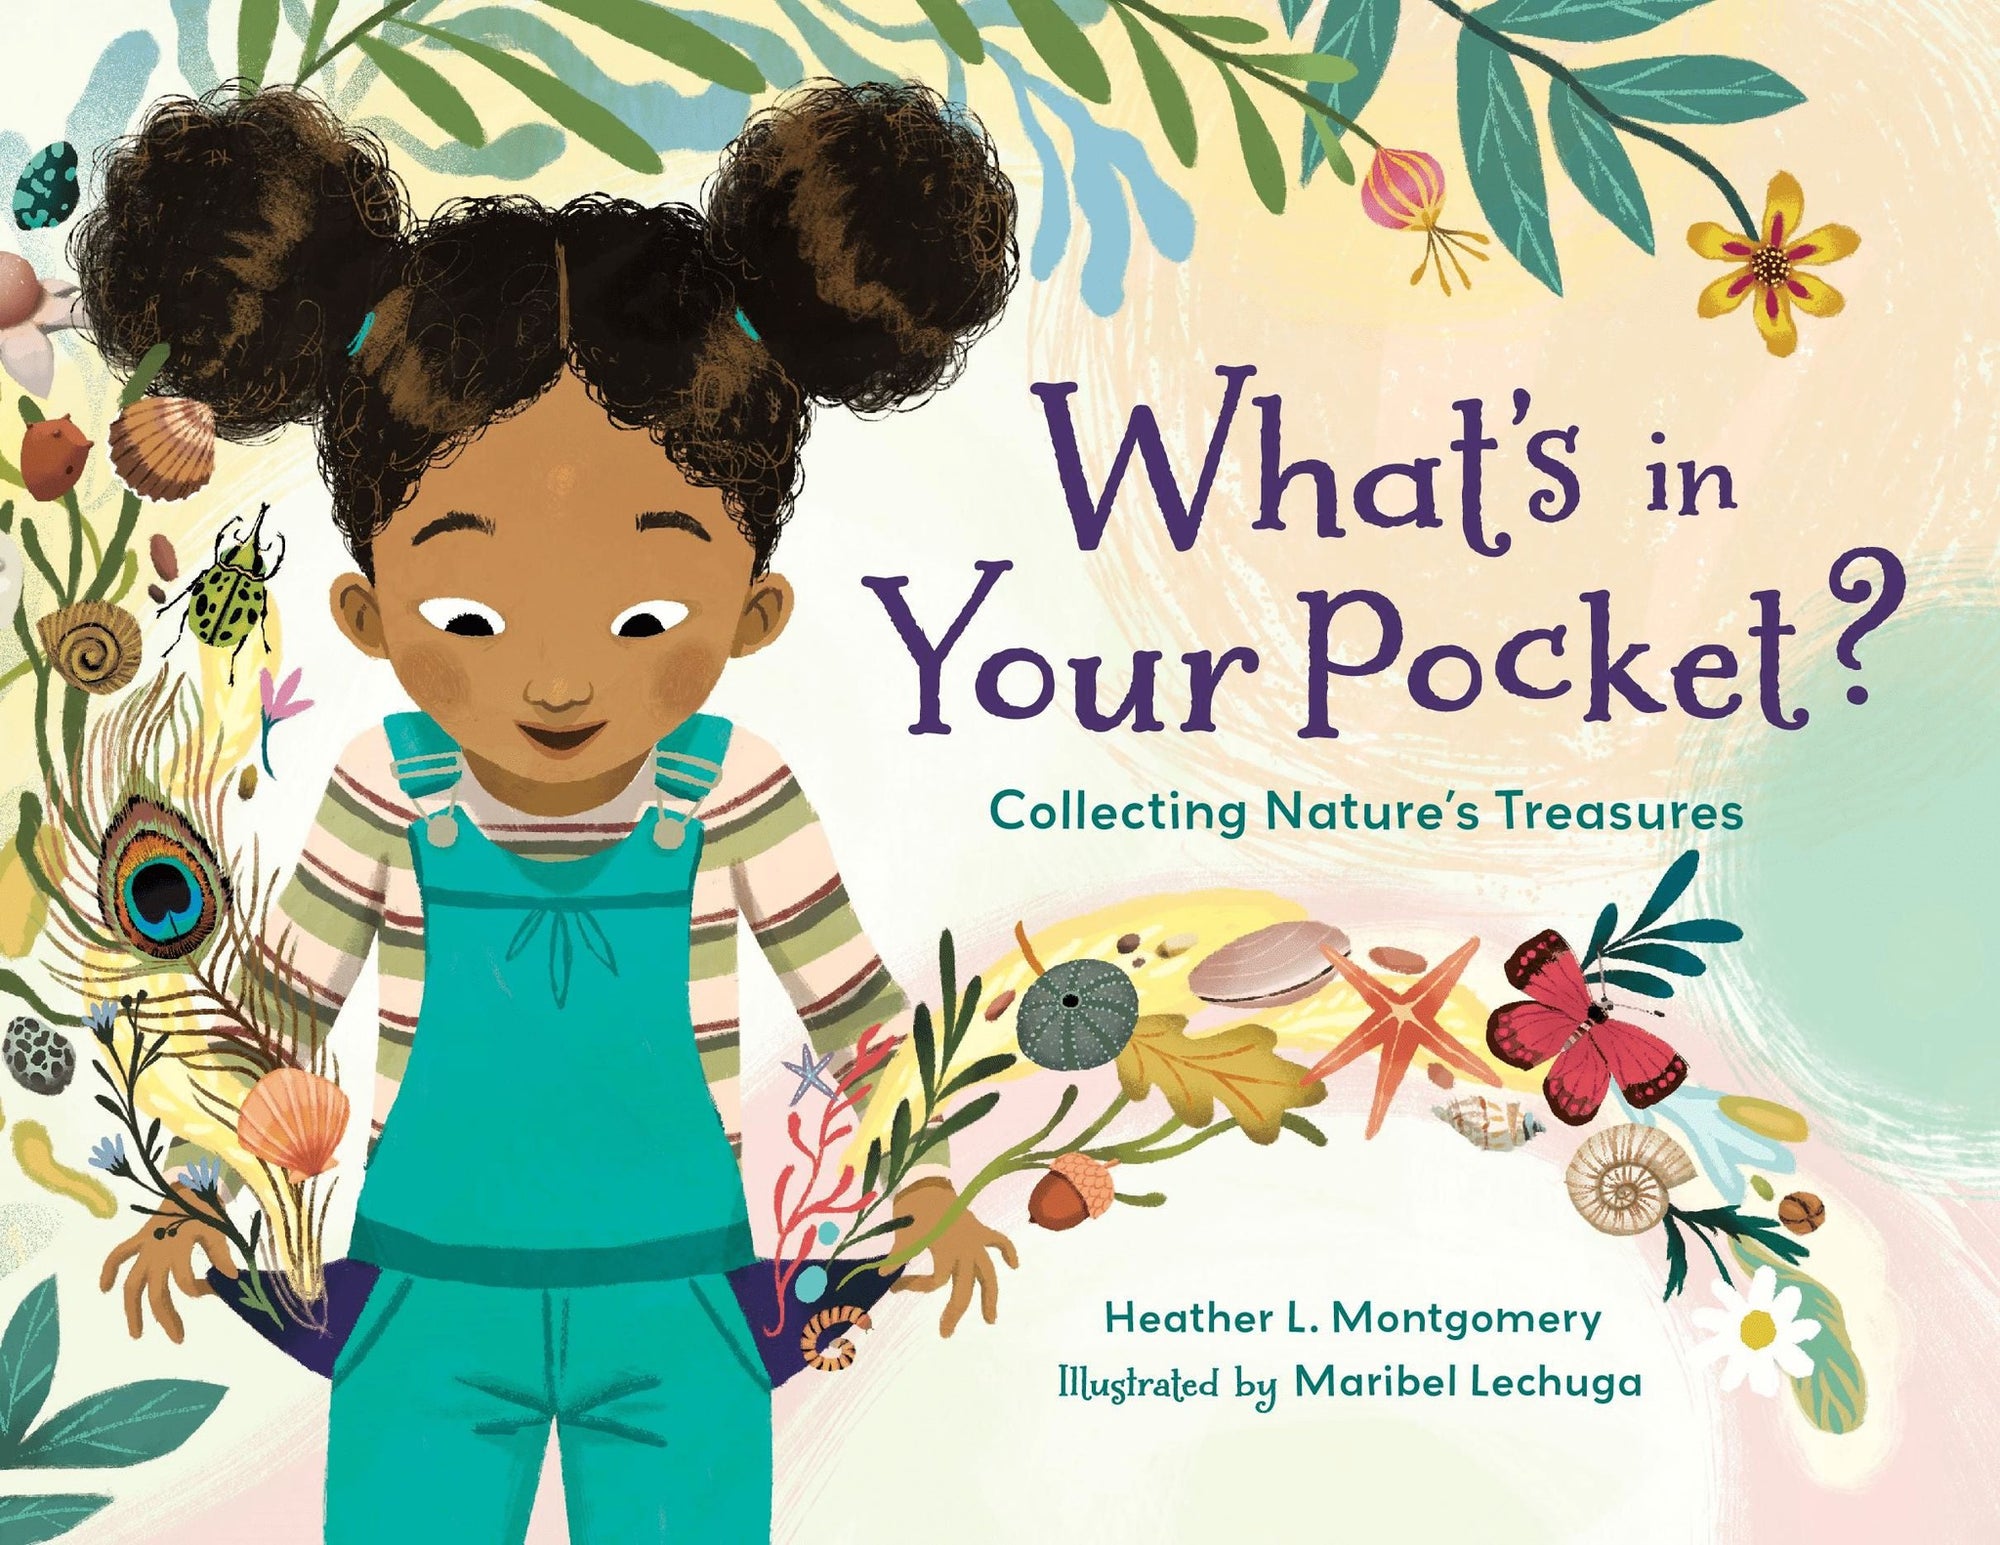 What's in Your Pocket : Collecting Natures Treasures by Heather L. Montgomery, illustrated by Maribel Lechuga.